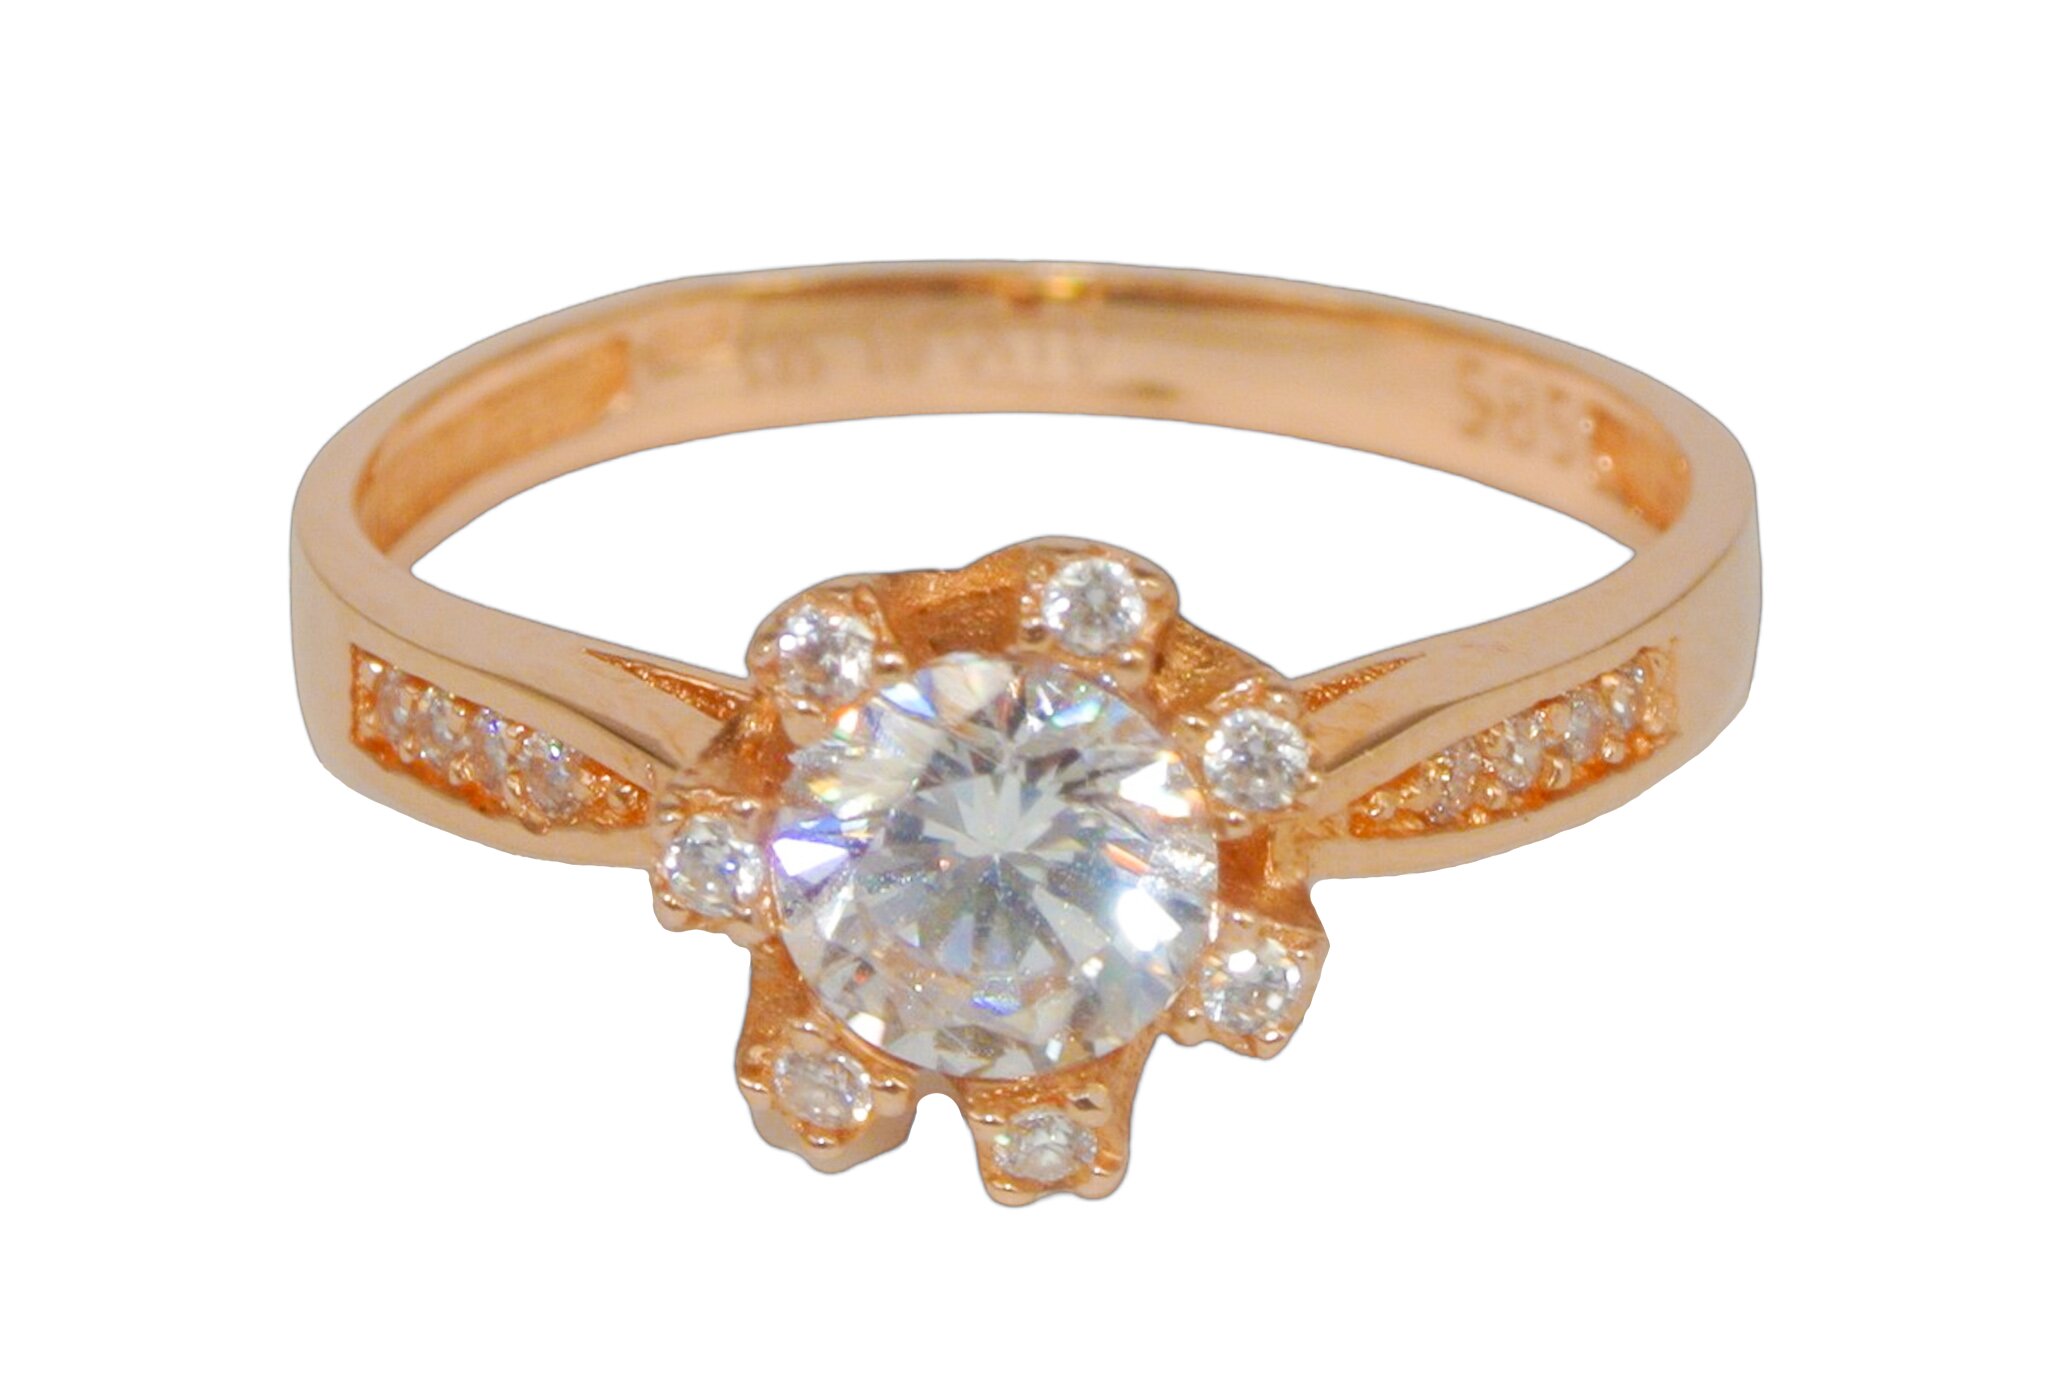 Elegant ring made of rose gold with zircons